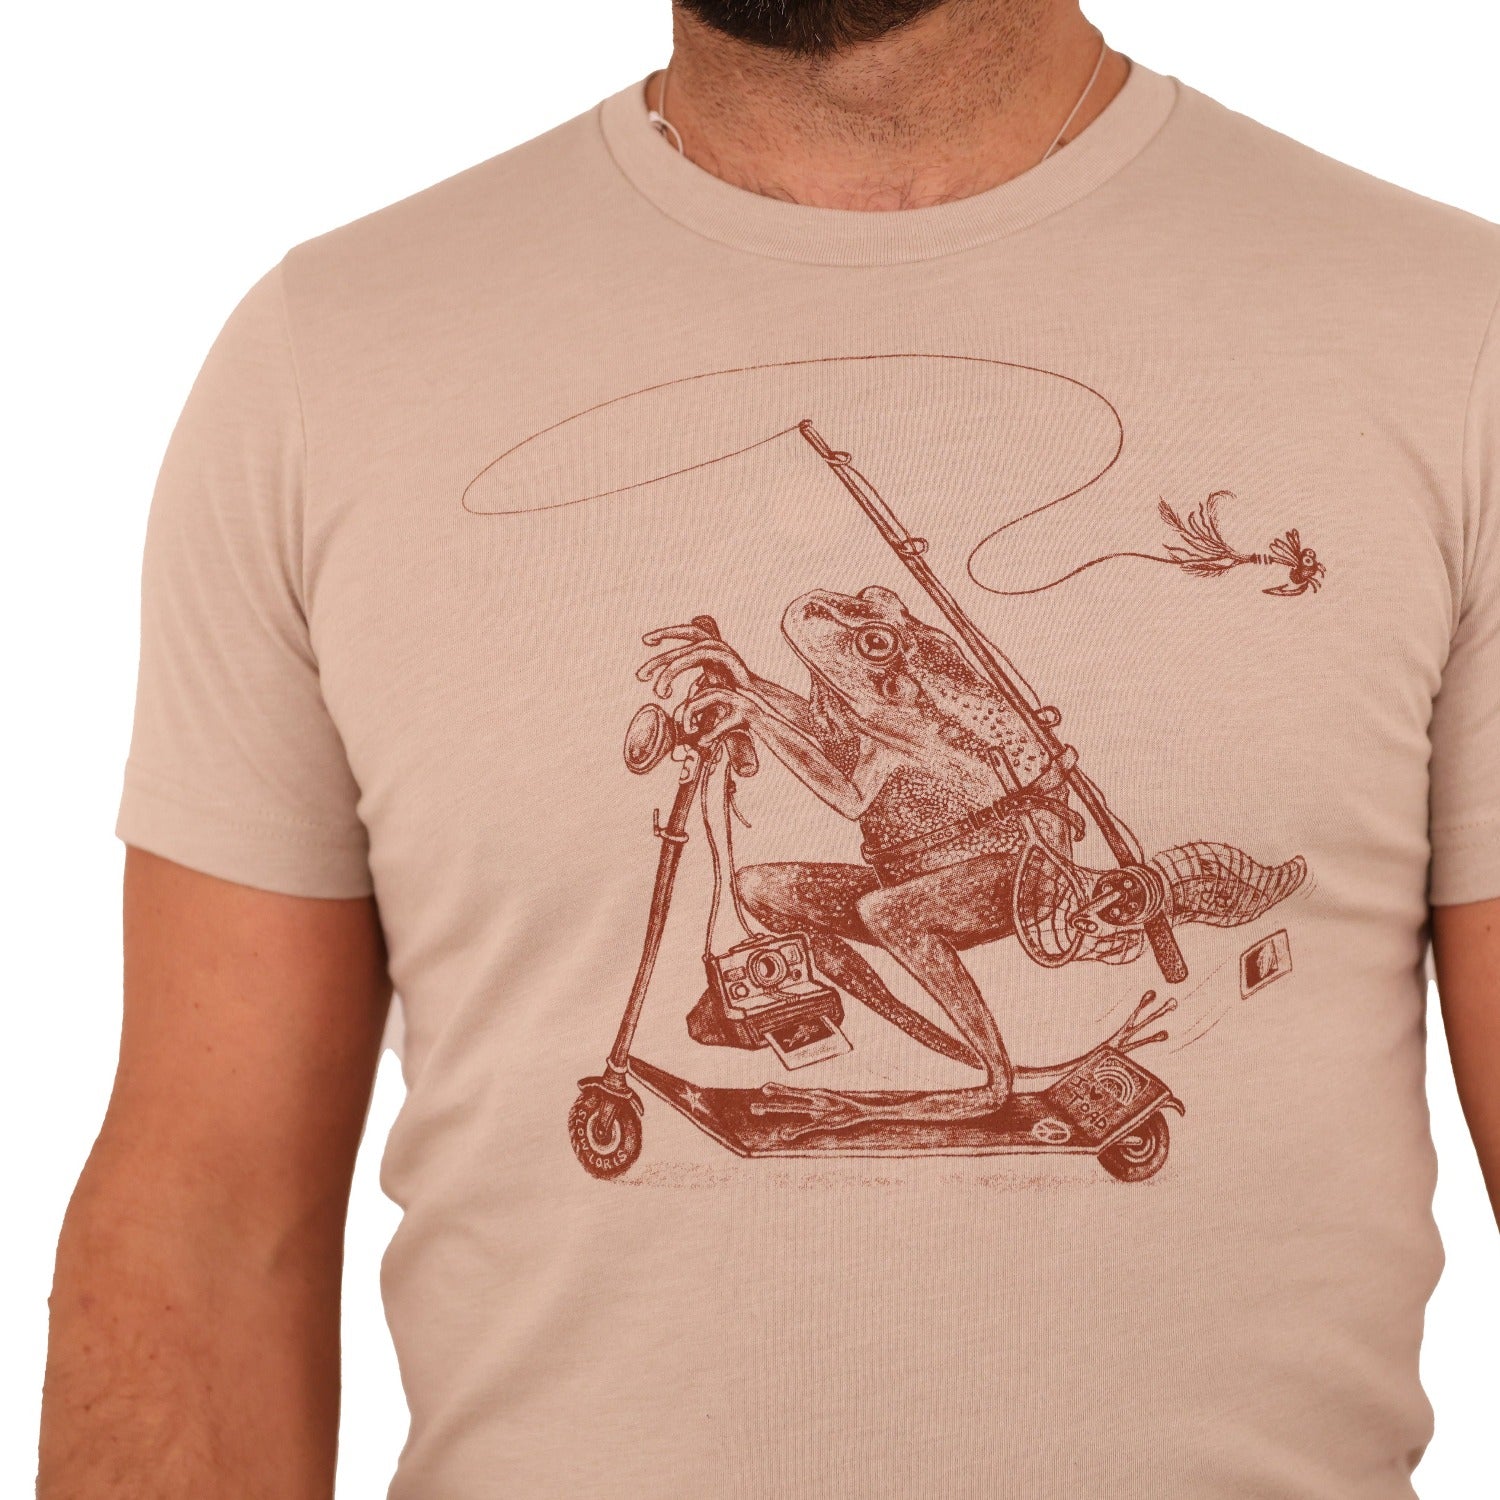 man wearing tan shirt with print of a frog riding a scooter with a fly fishing rod, net, polaroid camera